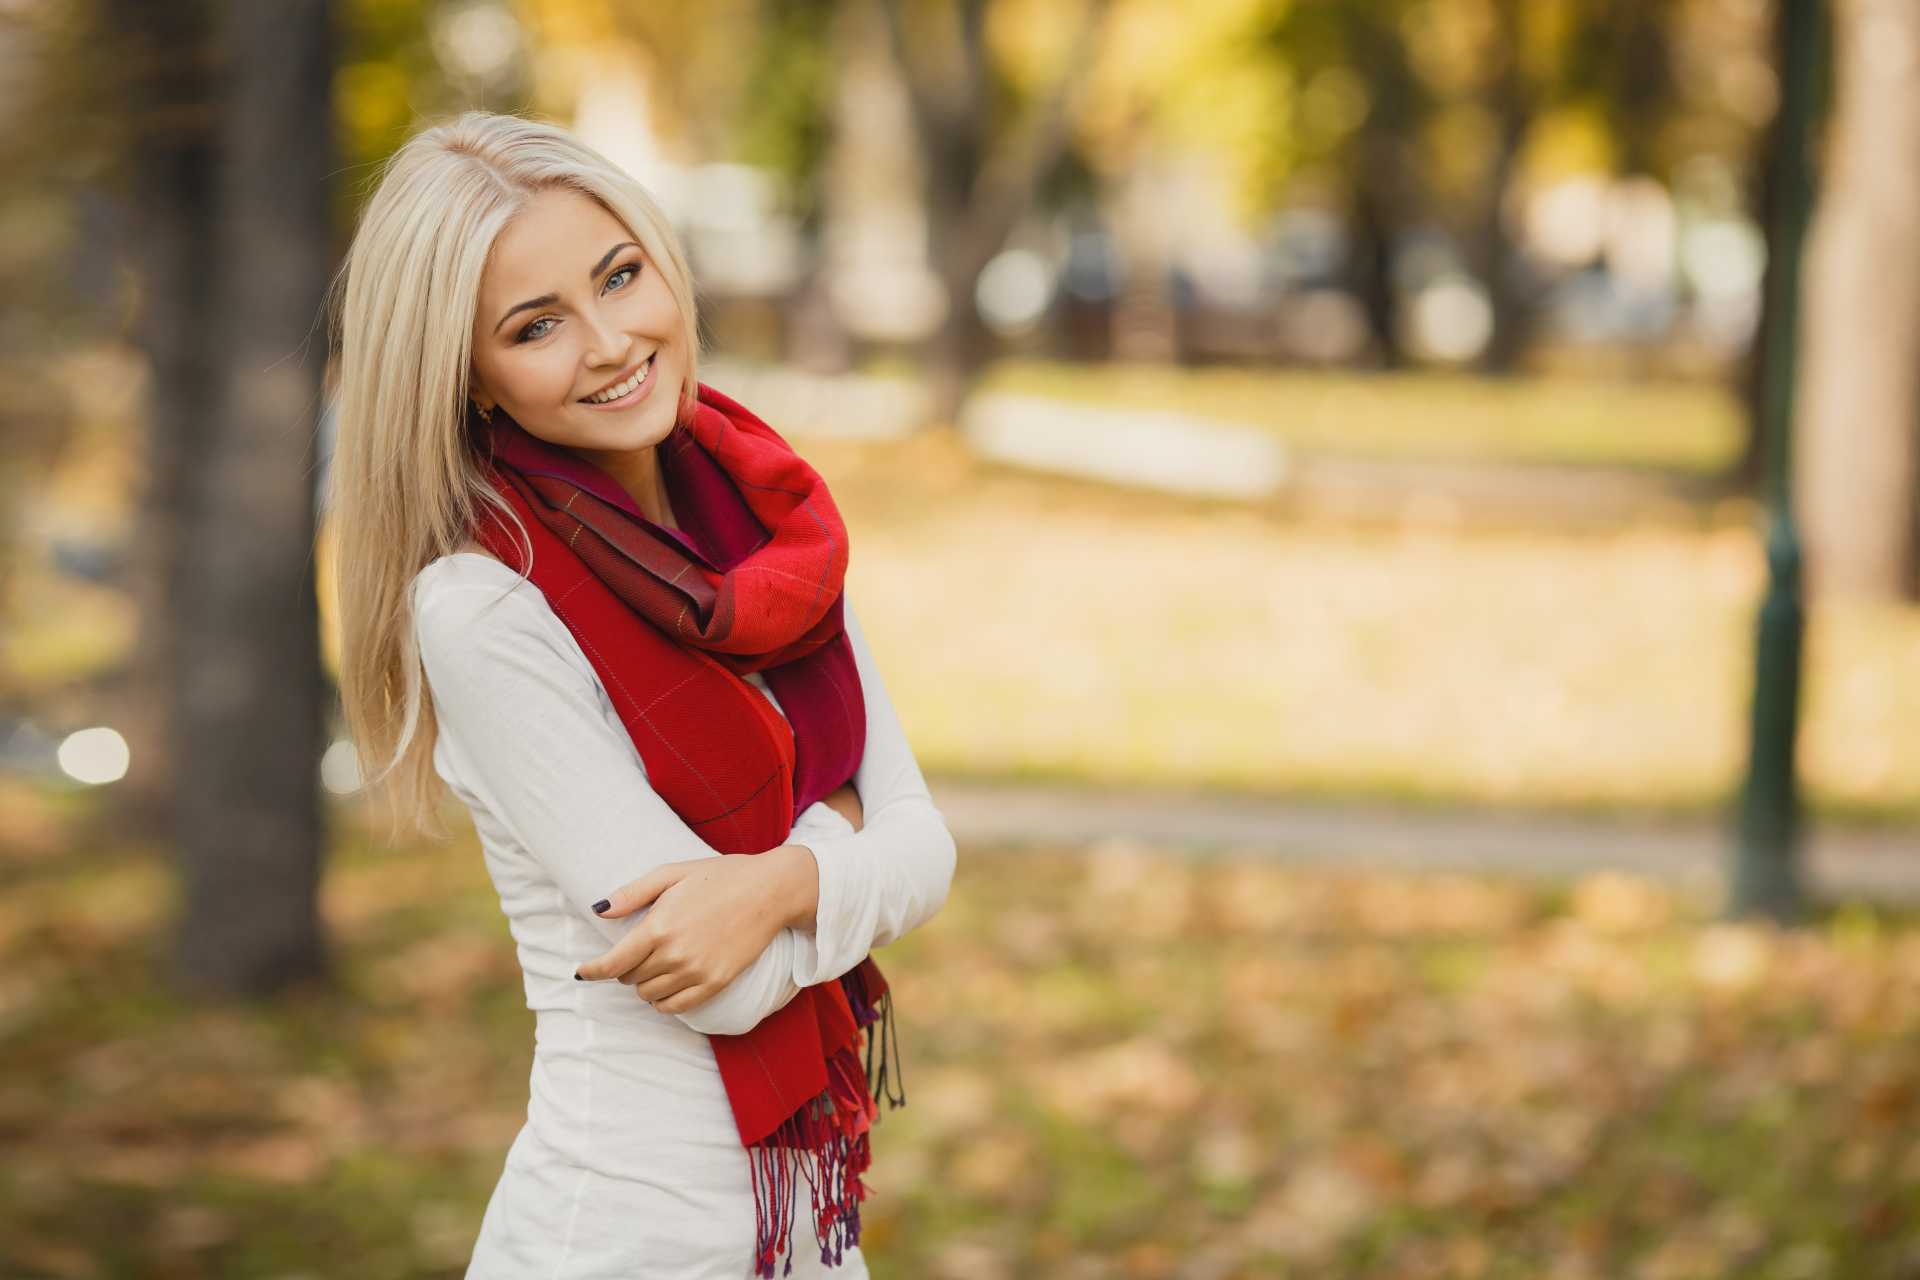 Skin Care Tips for Fall